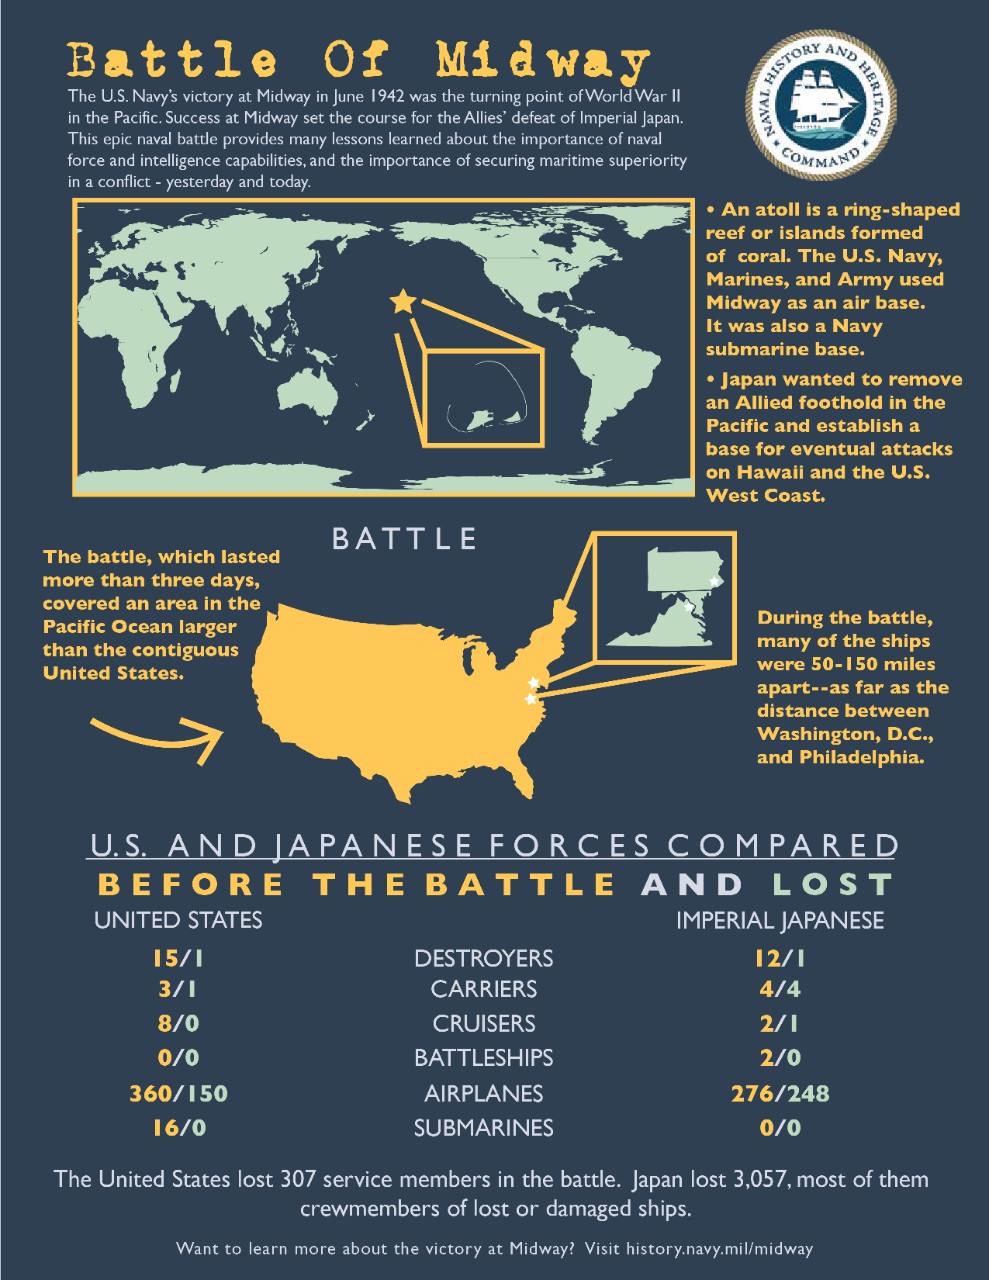 Scale of the Battle of Midway